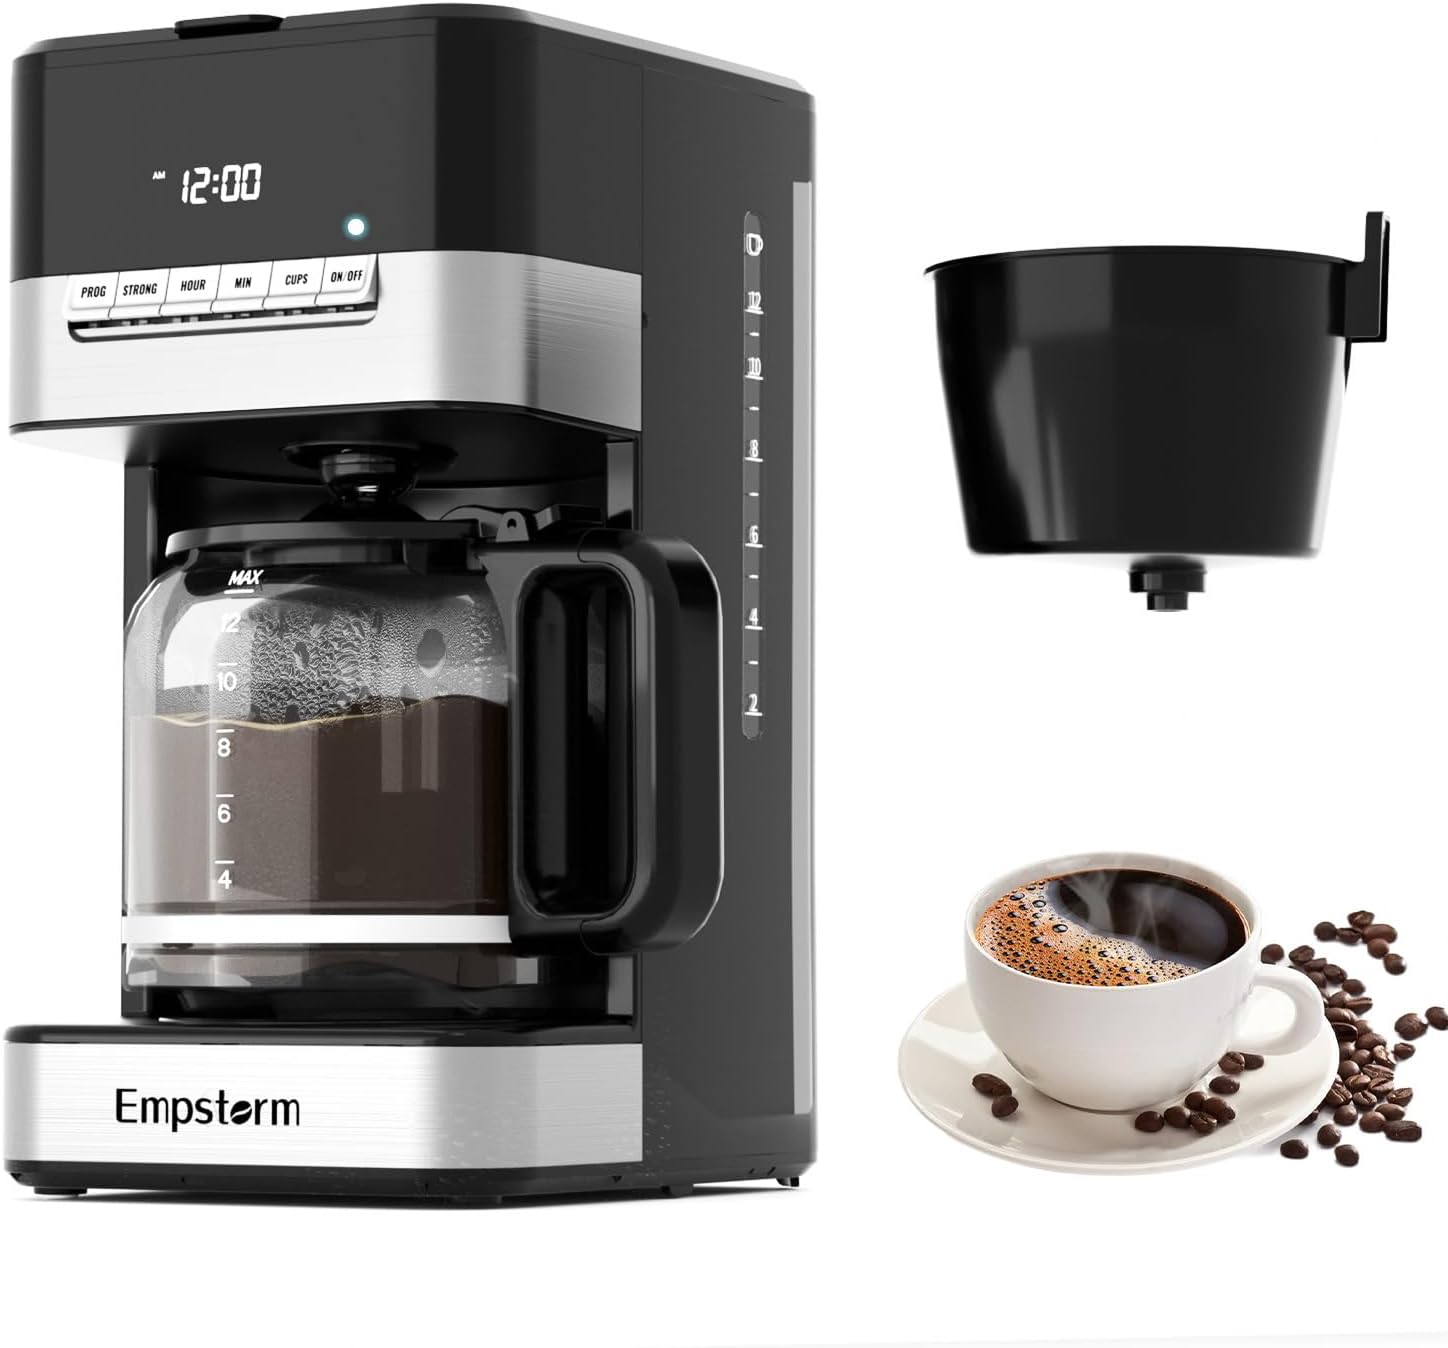 Empstorm 12 Cup Programmable Drip Coffee Maker - 1000W Fast Brew Coffee Machine with Glass Carafe, Auto Shut Off  4-Hour Keep Warm, Anti-Drip System, Strong Brew, Black with Stainless Steel Accents